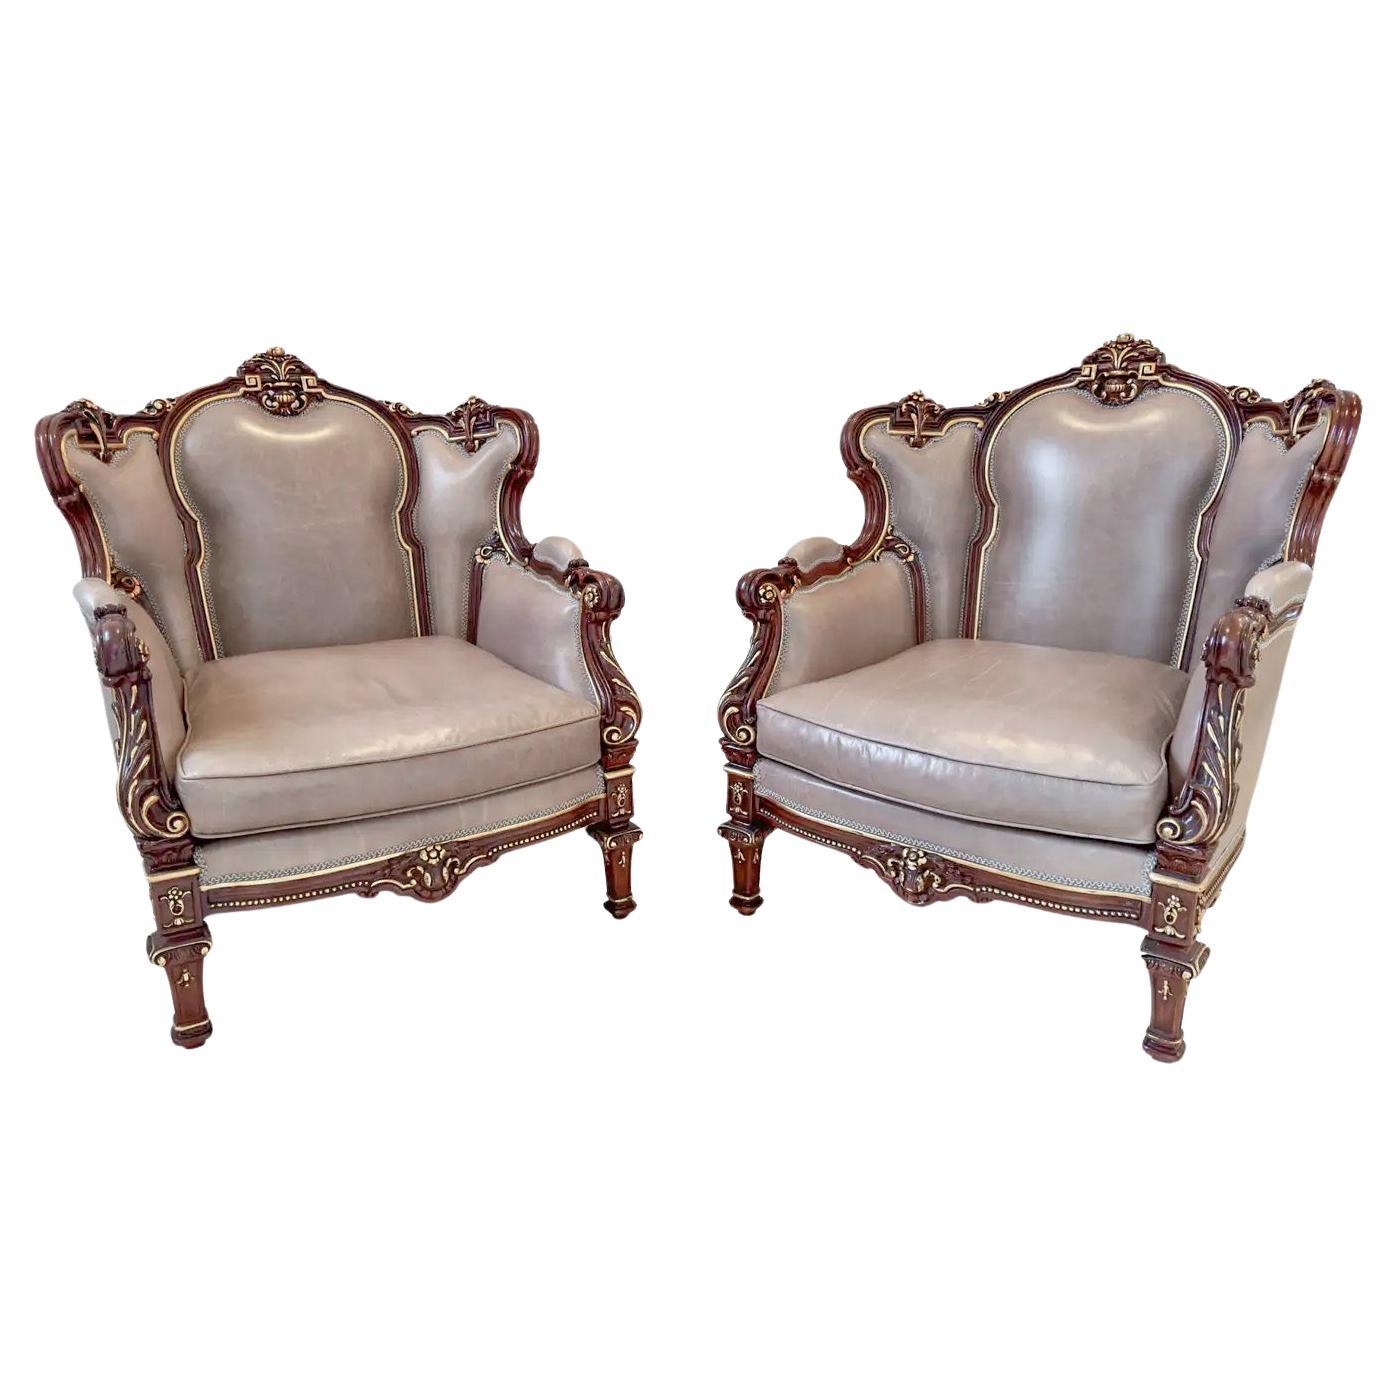 Italian Rococo Style Carved Wood Bergere chair with Leather upholstery, a Pair For Sale